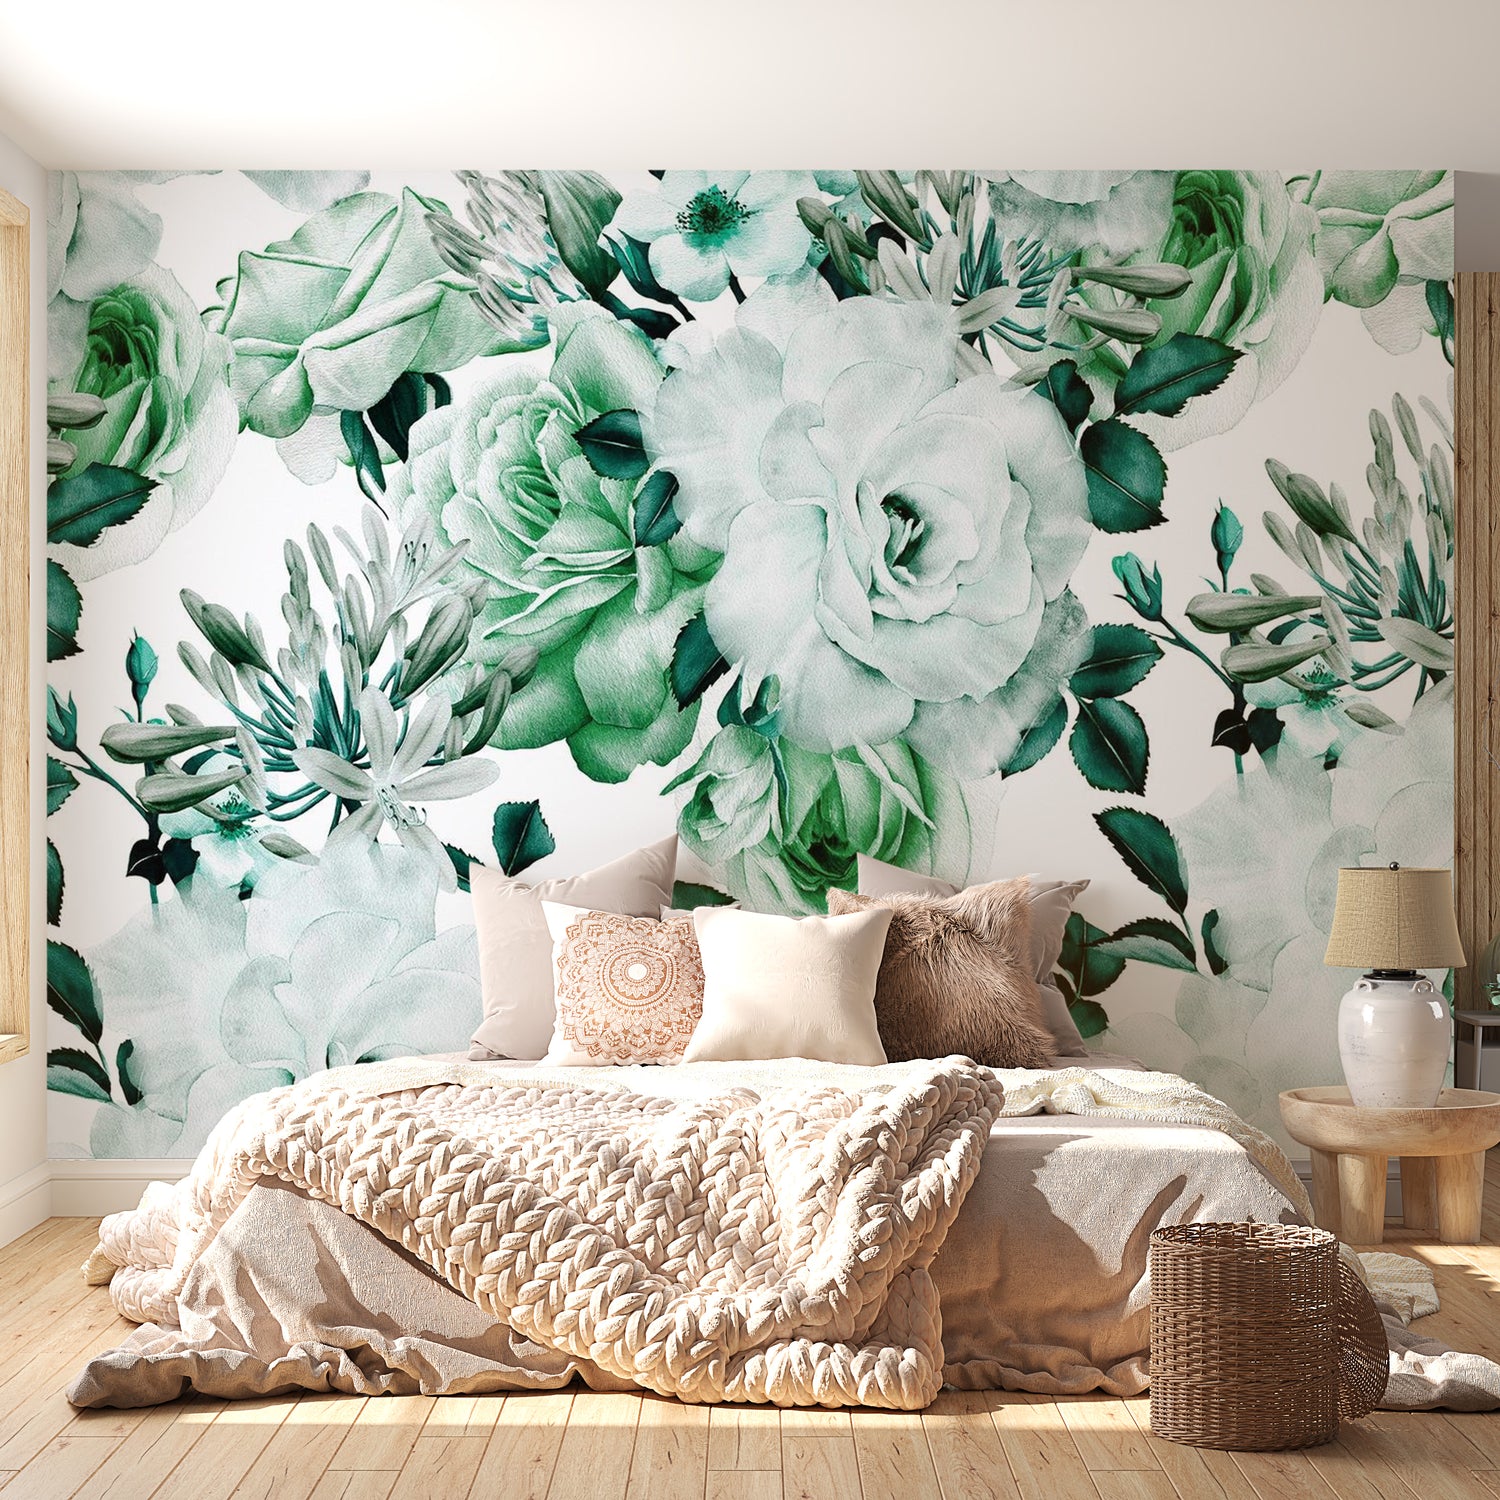 Peel & Stick Floral Wall Mural - Sentimental Garden Green - Removable Wall Decals